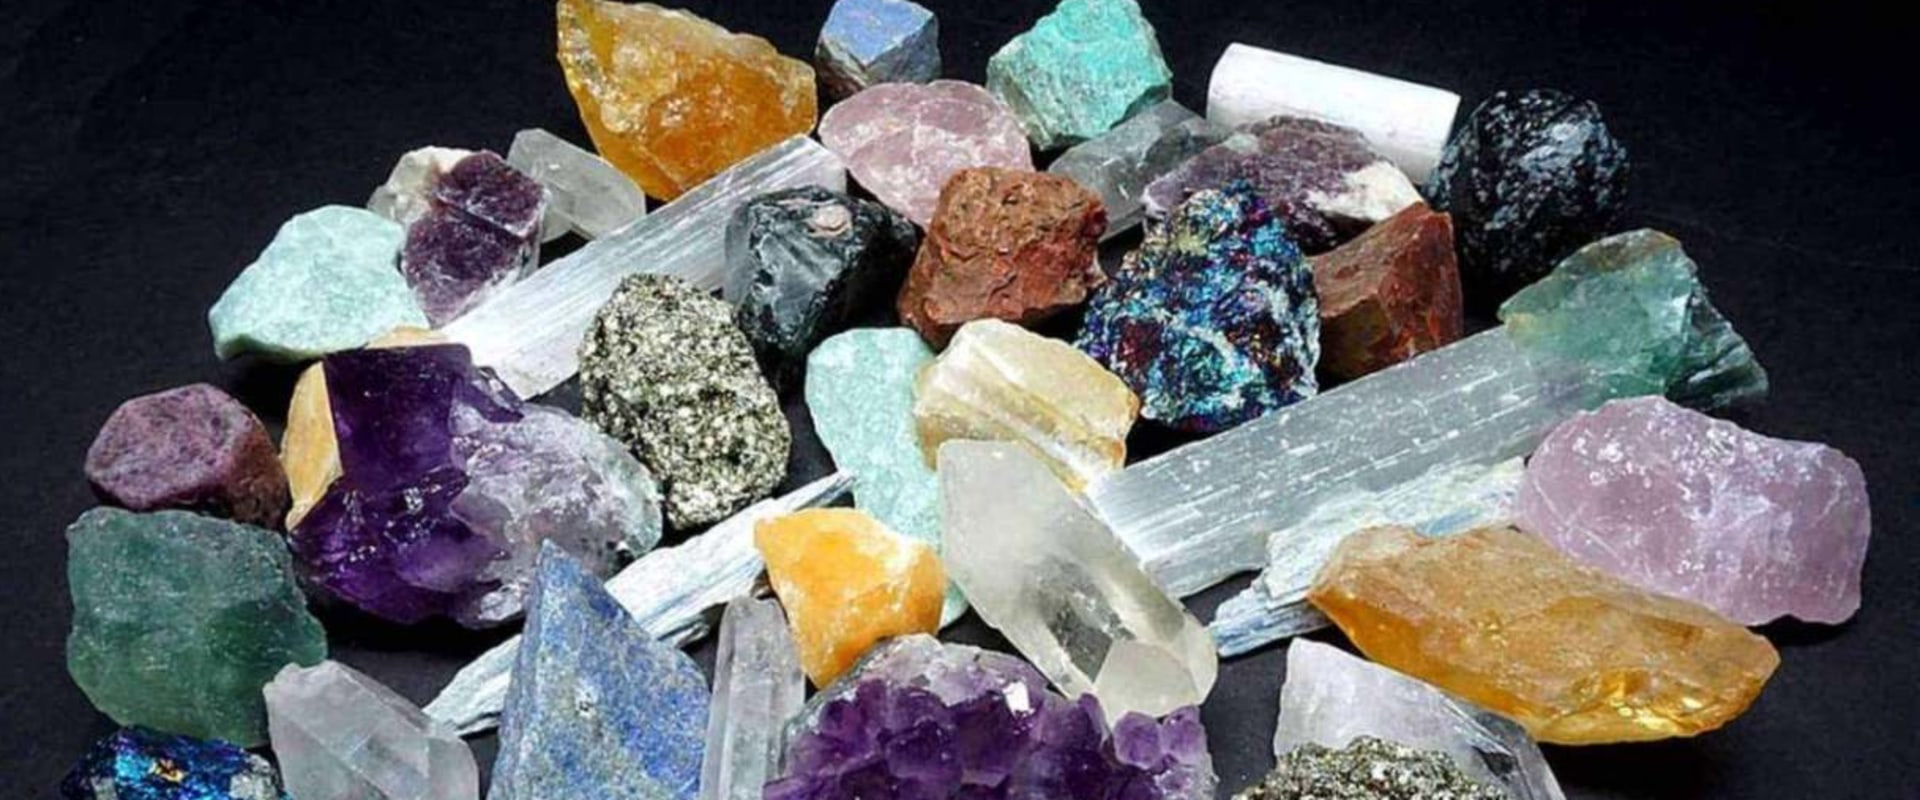 How Long Does it Take for Crystals to Form in the Earth?